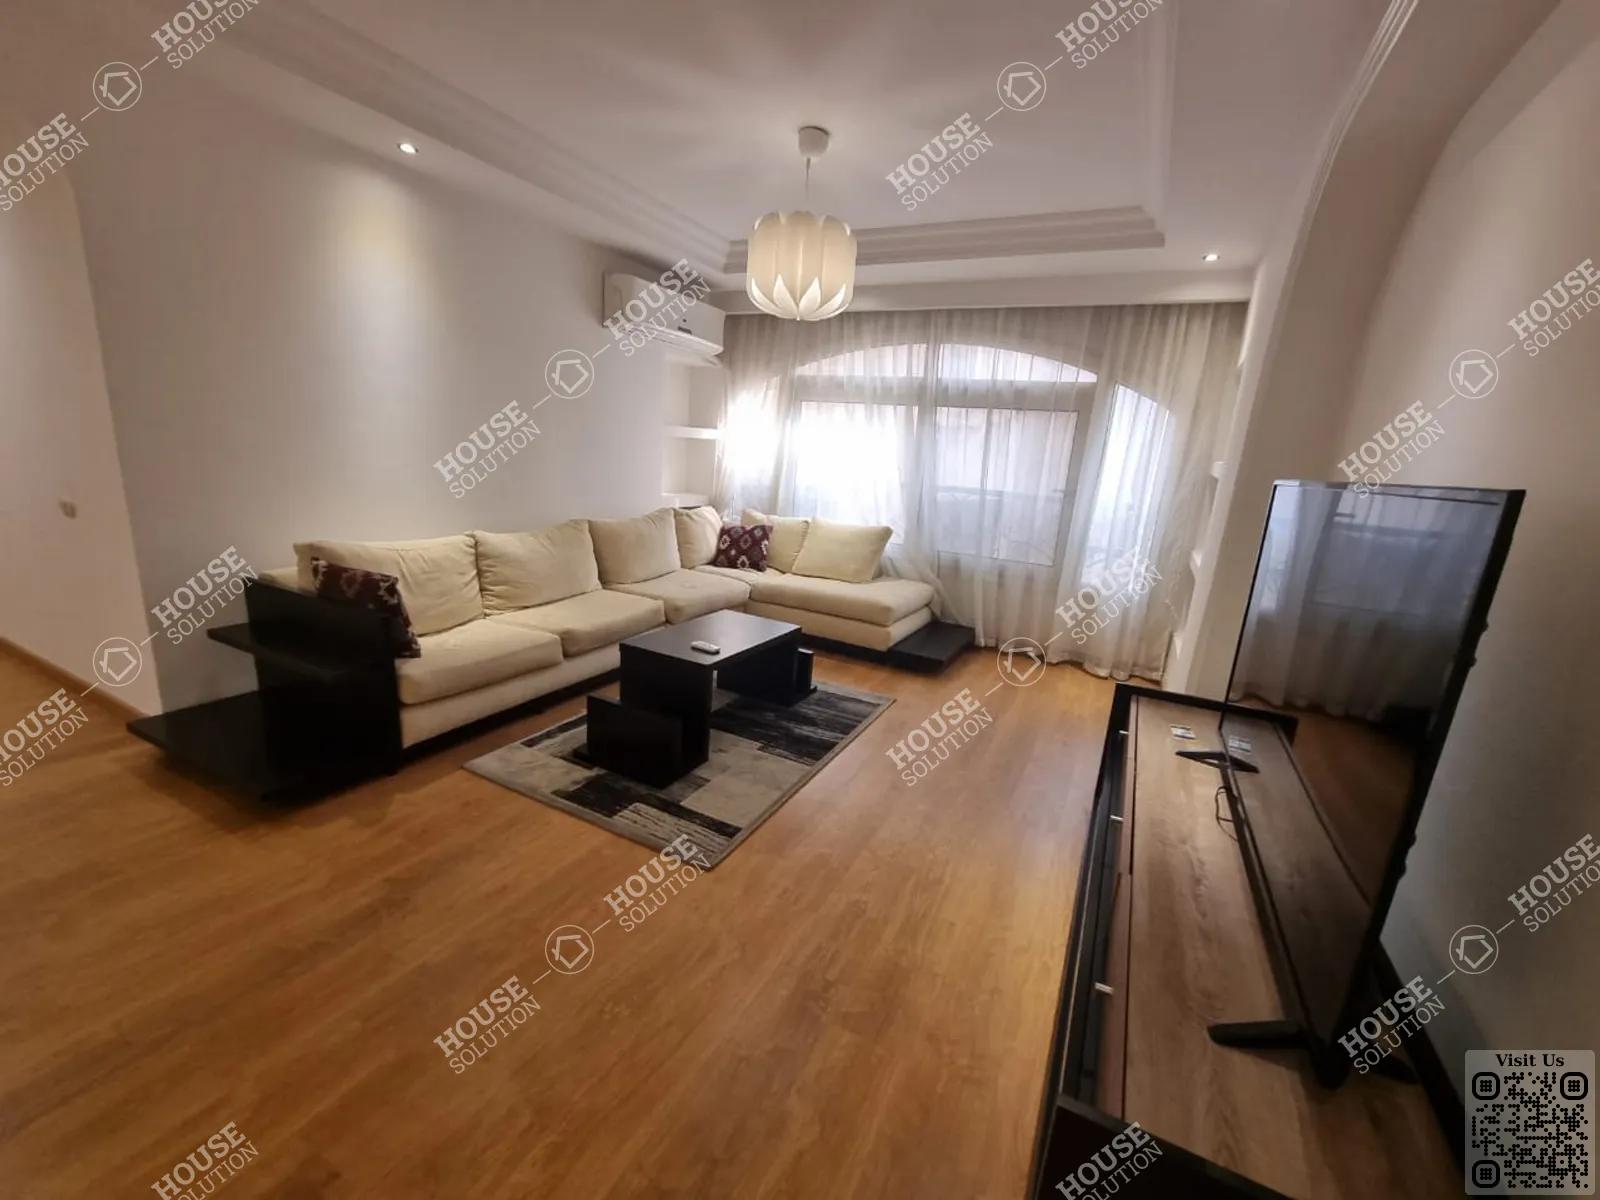 LIVING AREA  @ Apartments For Rent In Maadi Maadi Sarayat Area: 320 m² consists of 4 Bedrooms 4 Bathrooms Modern furnished 5 stars #5628-1